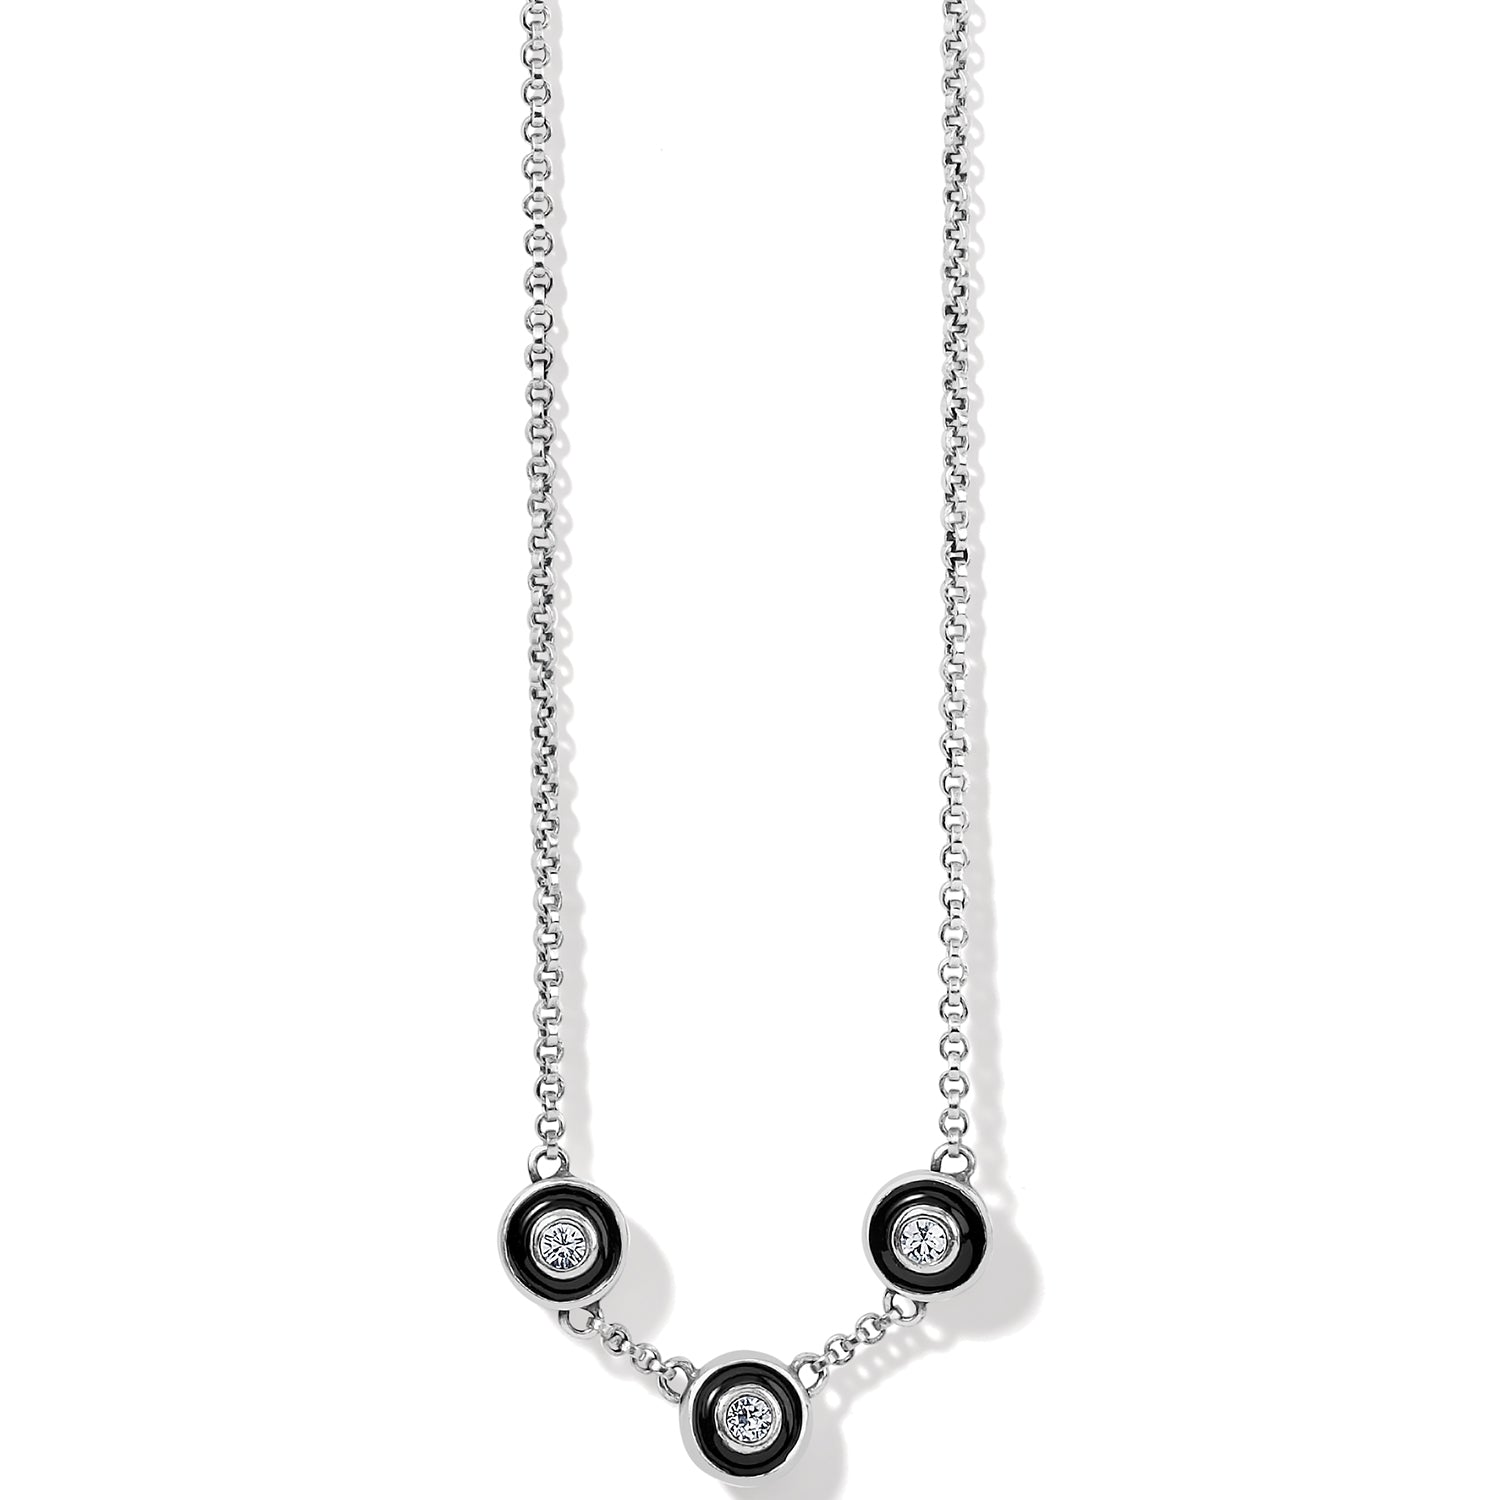 Brighton Meridian Eclipse Station Necklace